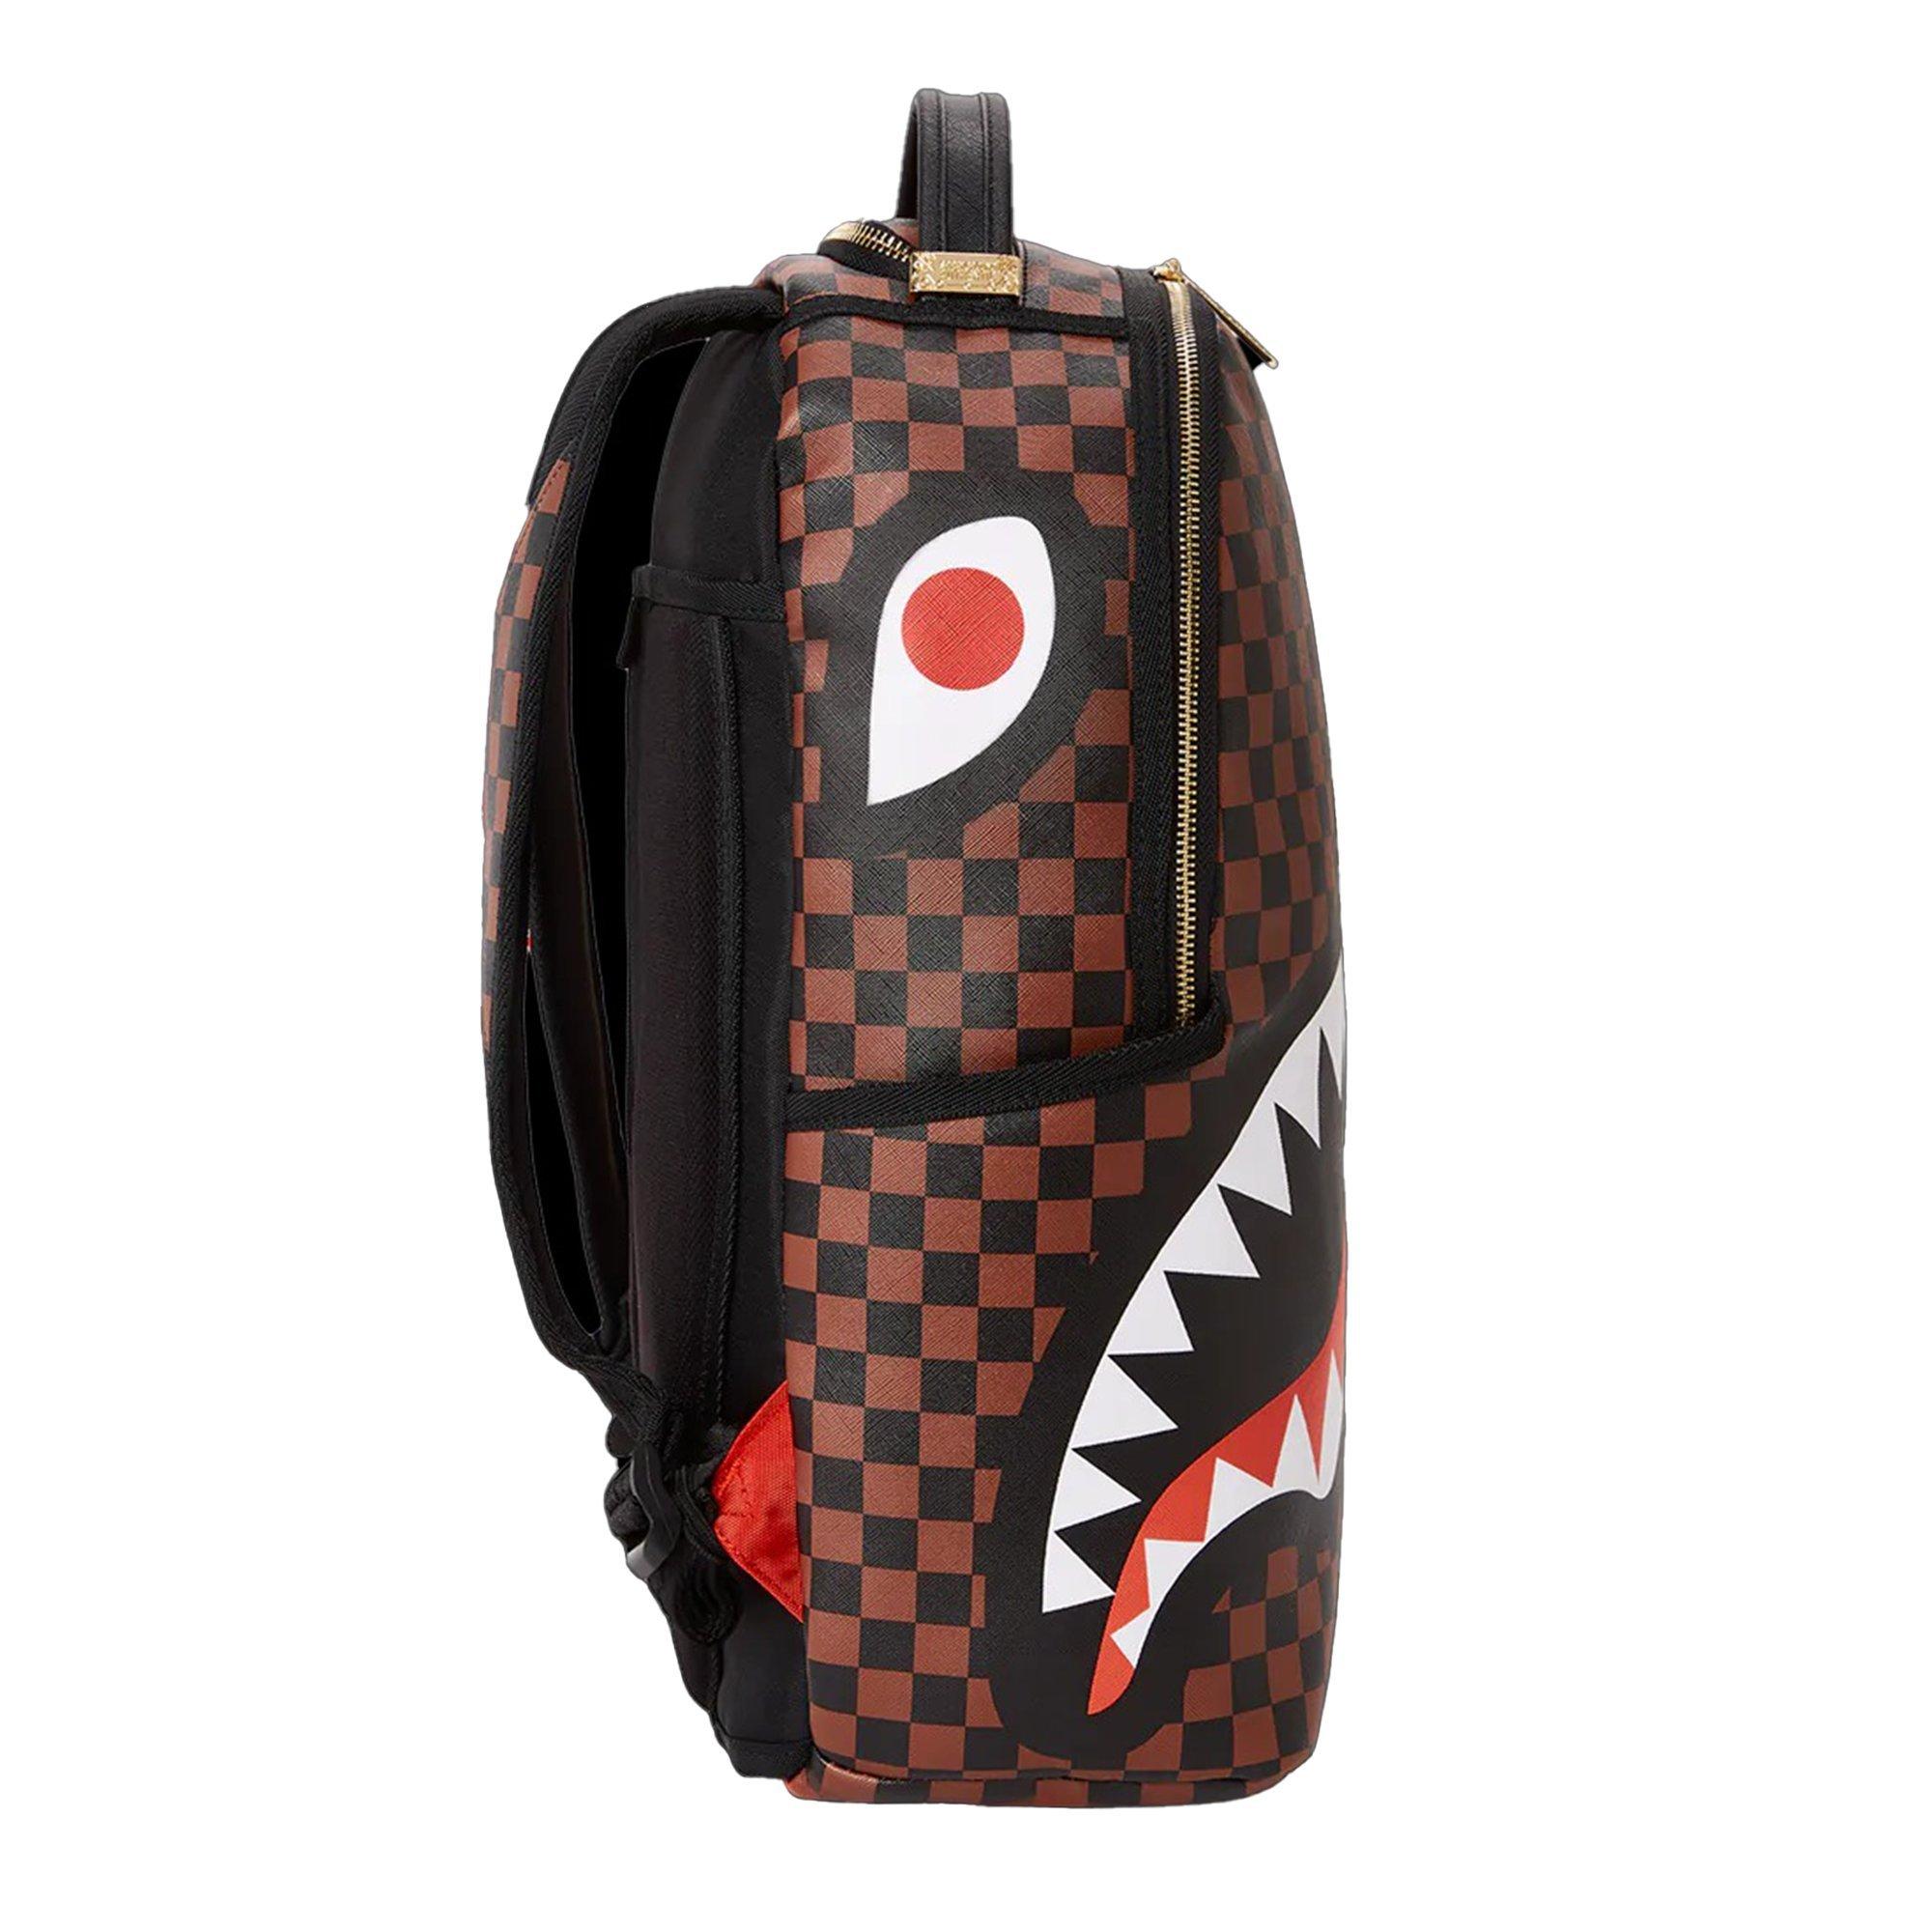 Sprayground Side Sharks in Paris Backpack for Sale in Kent, WA